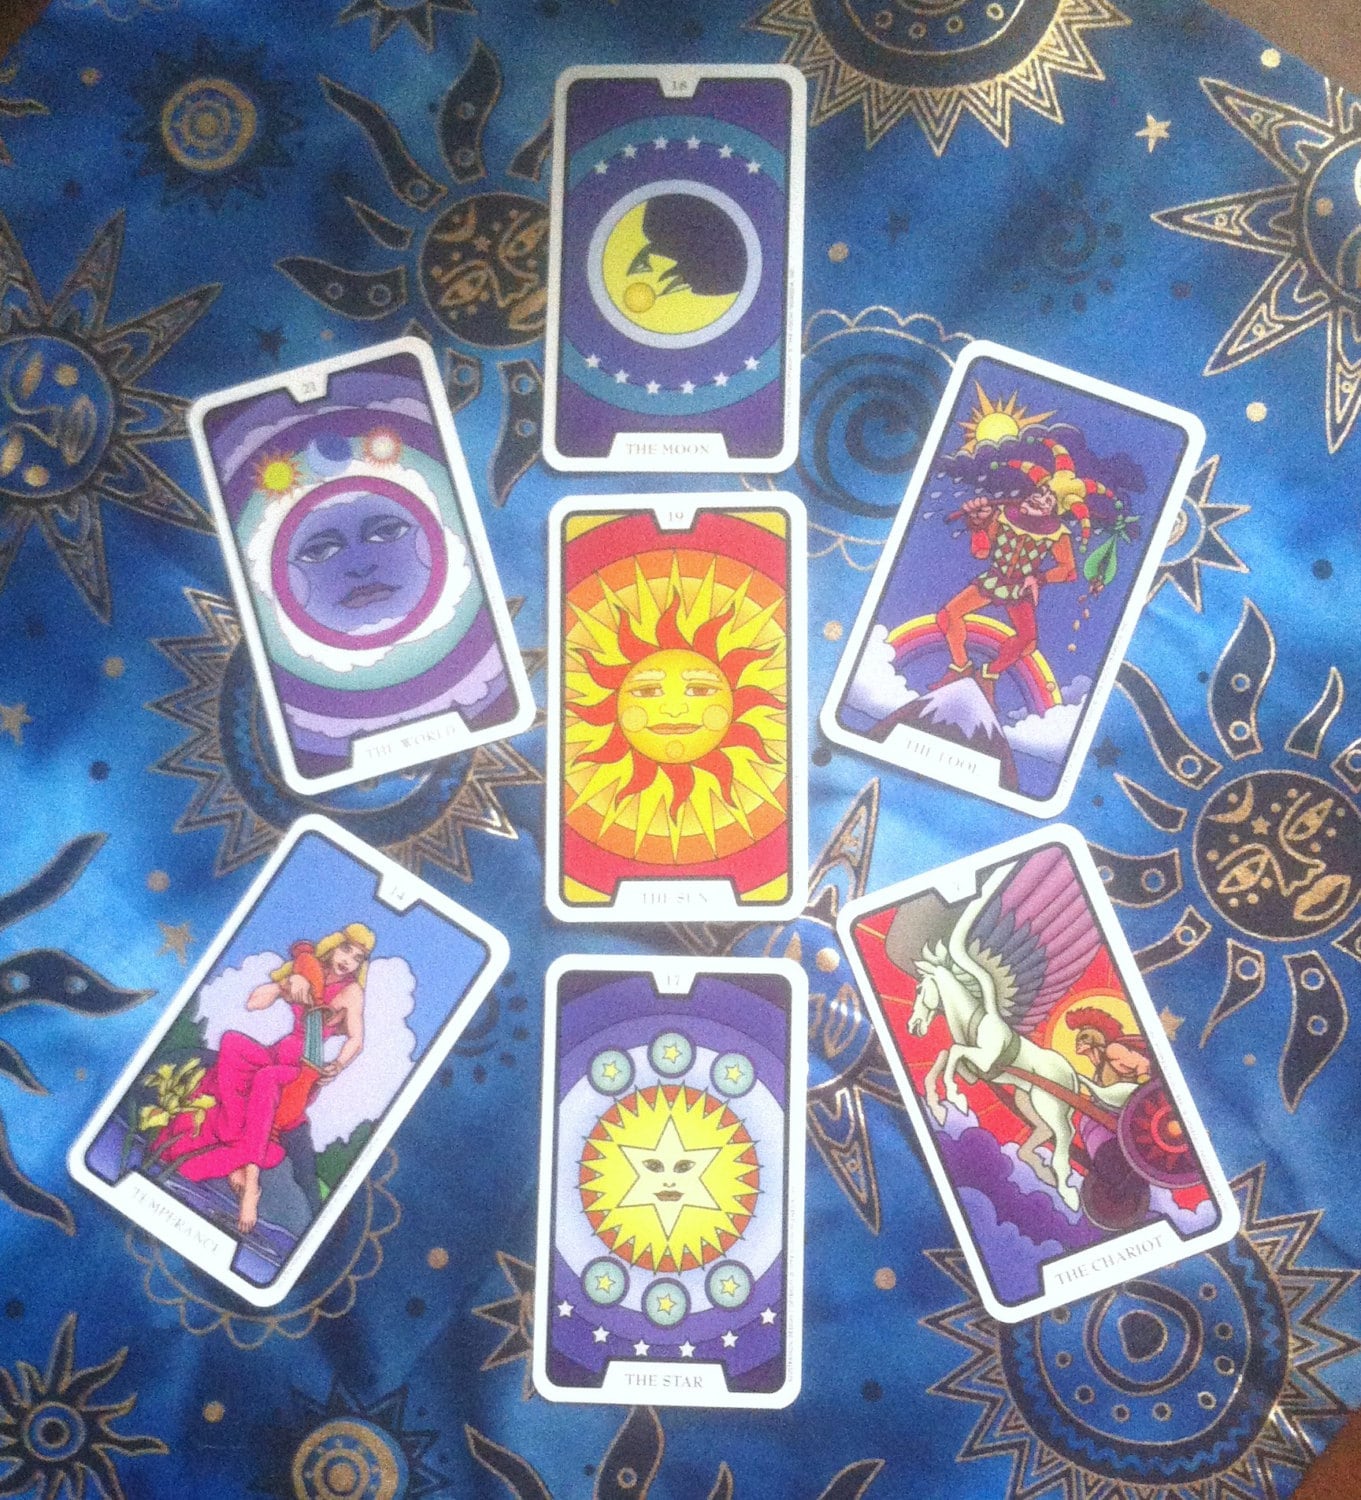 Caring Psychic Tarot Reading 7-10 card spread by MojoqueenPsychic